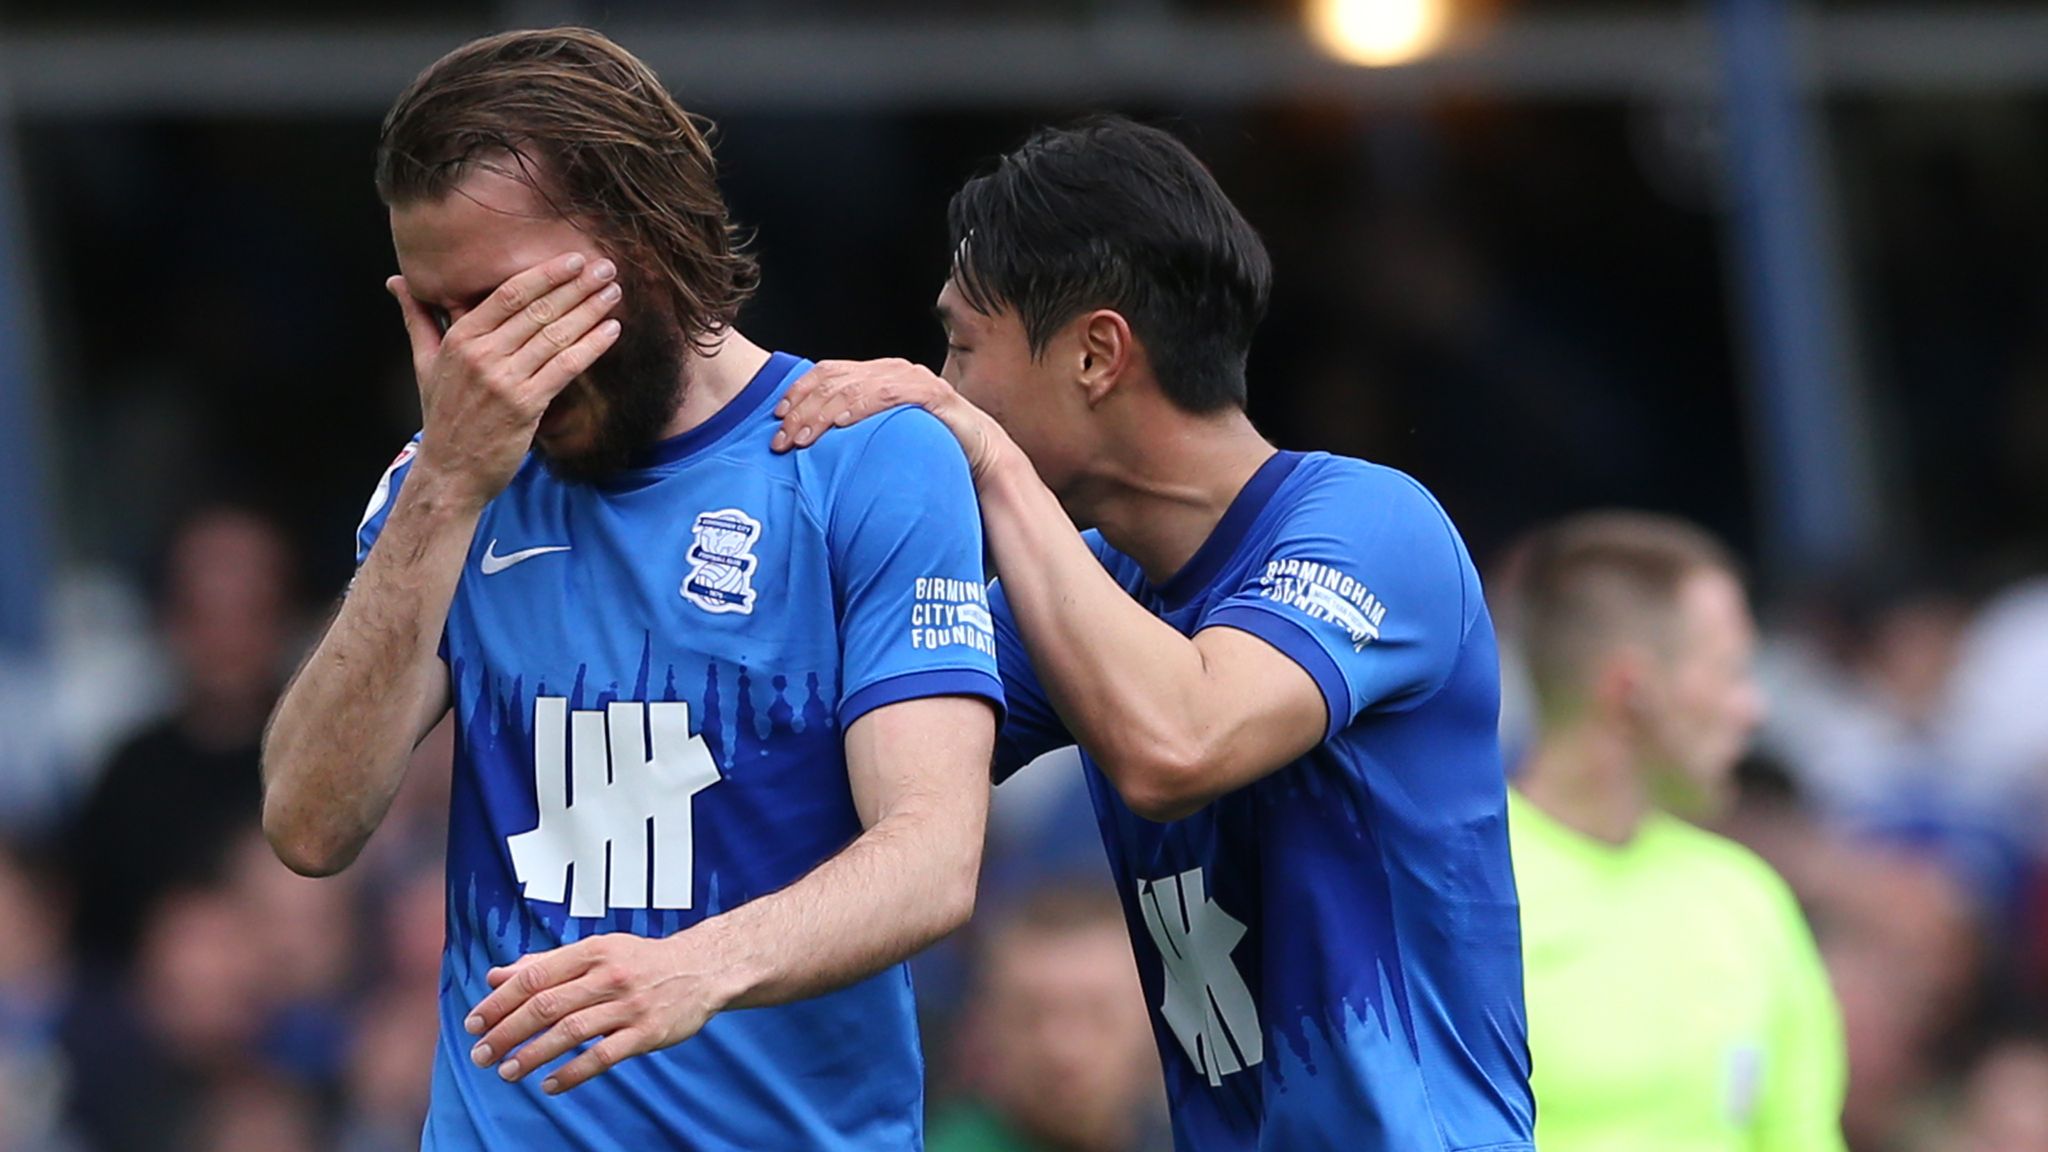 Birmingham City's Plunge from Grace: From Championship Hopes to League One Descent